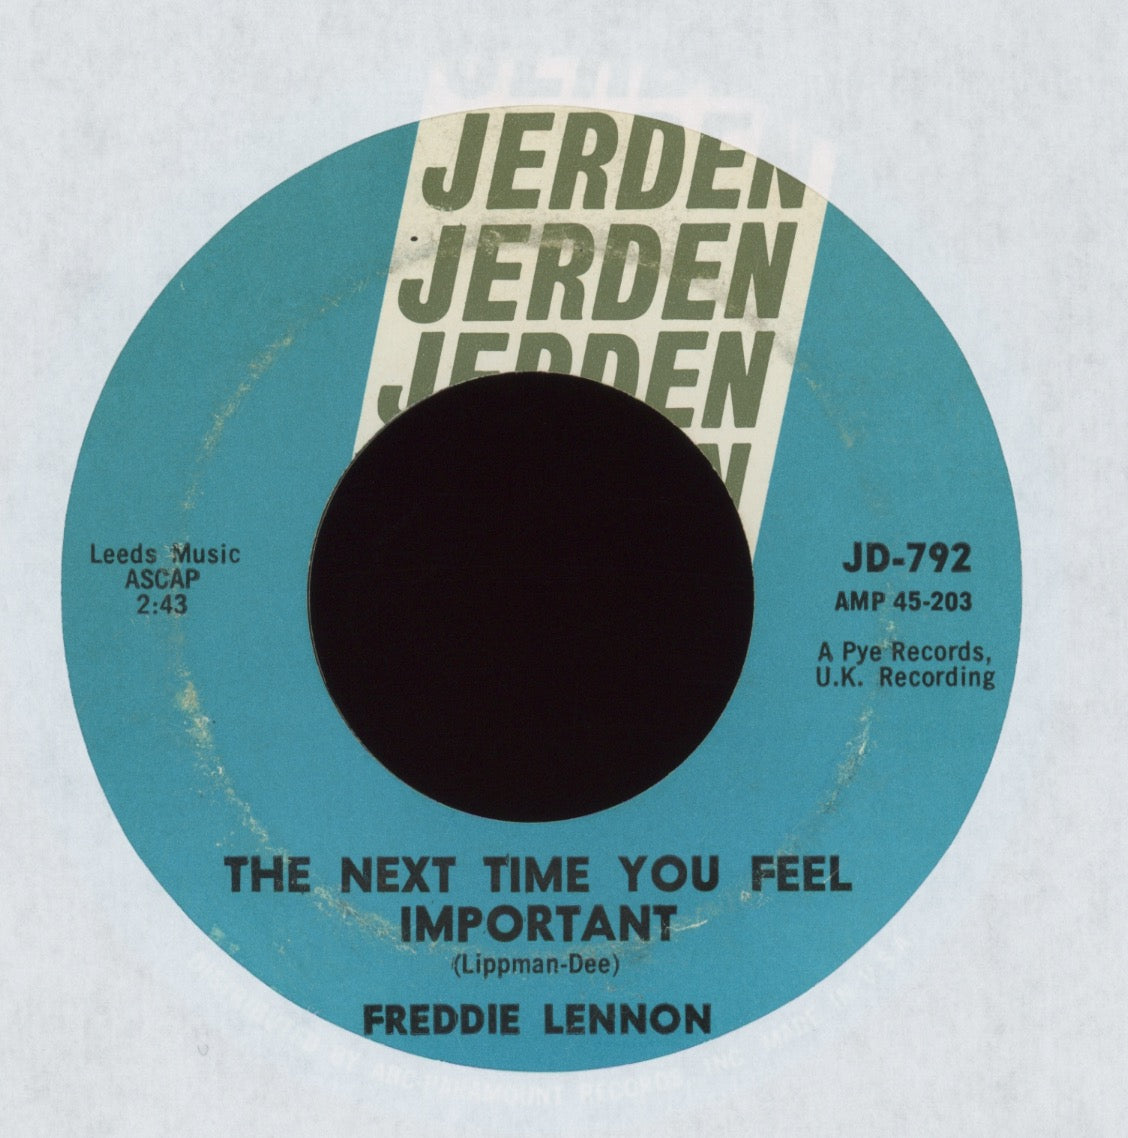 Freddie Lennon - That's My Life (My Love And My Home) on Jerden